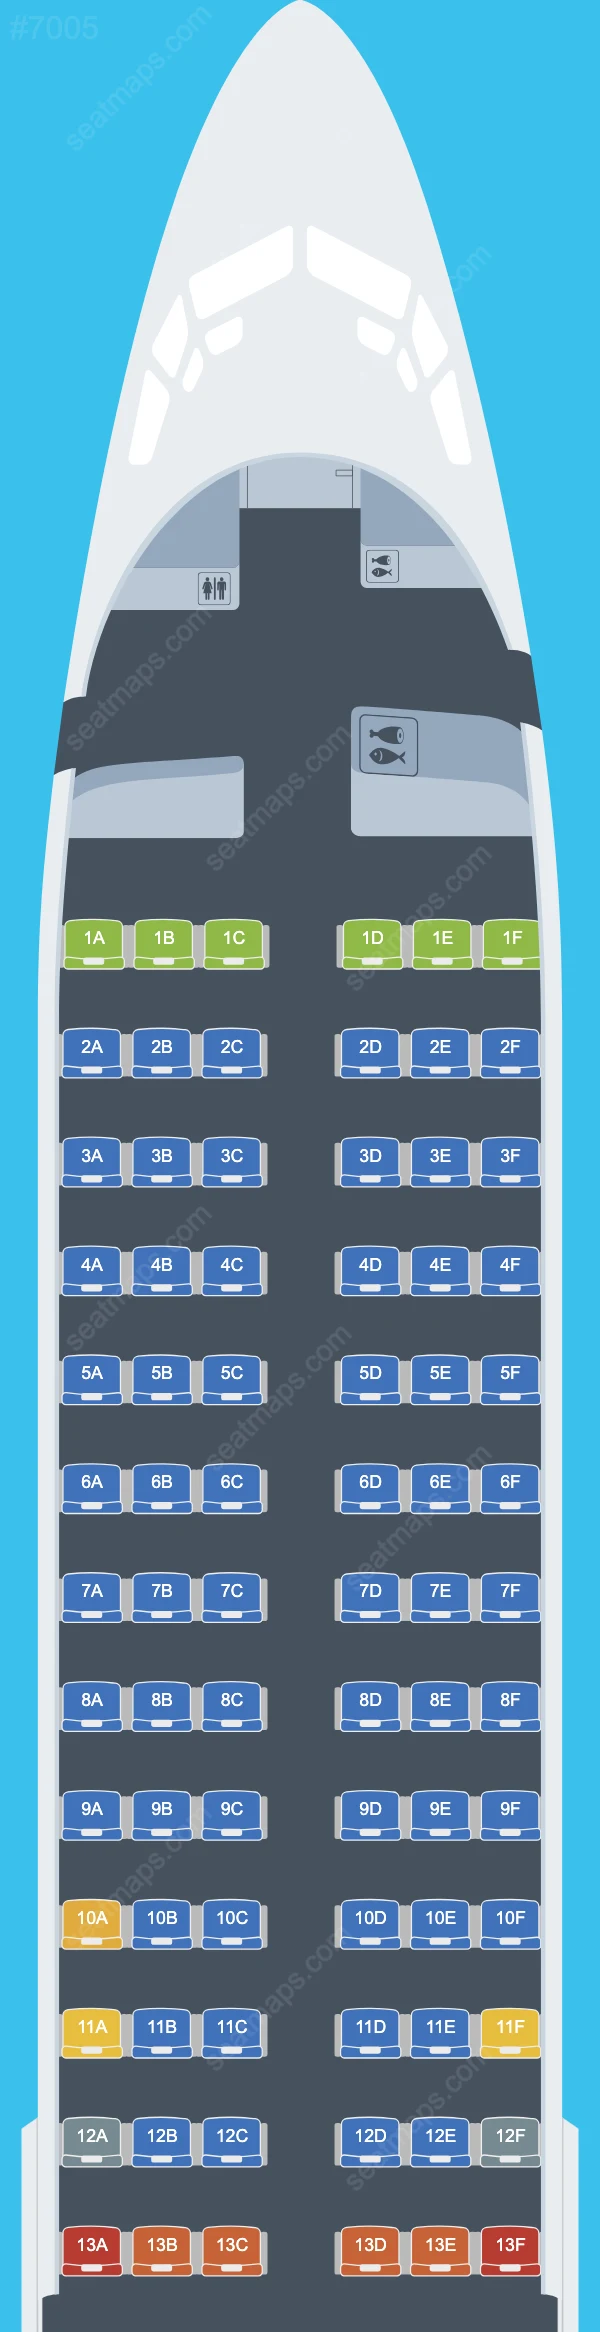 Lucky Air Boeing 737 Seat Maps 737-800 V.2